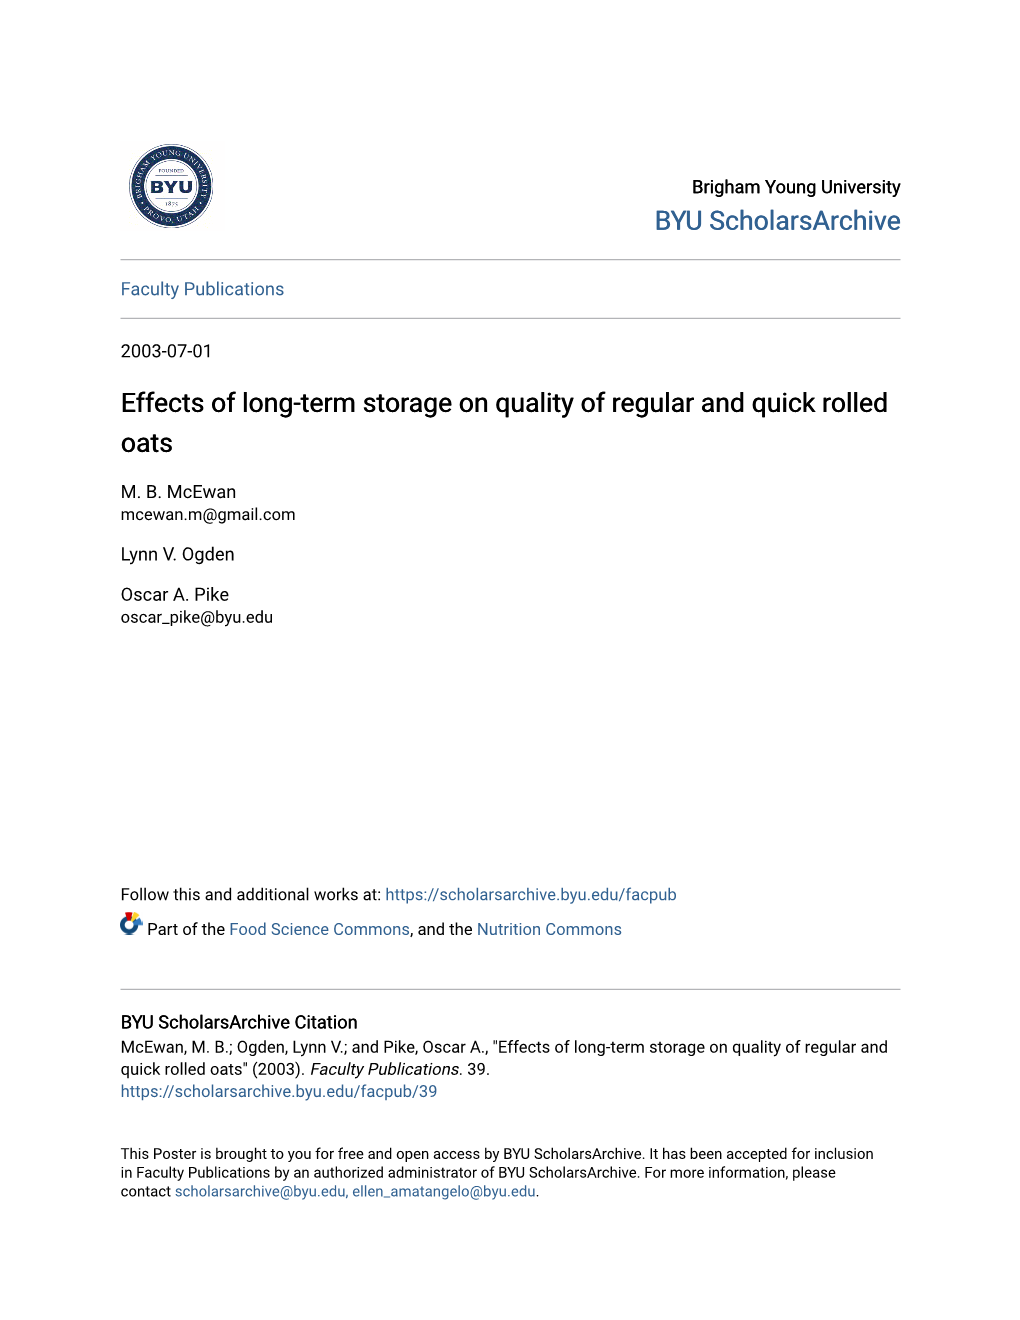 Effects of Long-Term Storage on Quality of Regular and Quick Rolled Oats